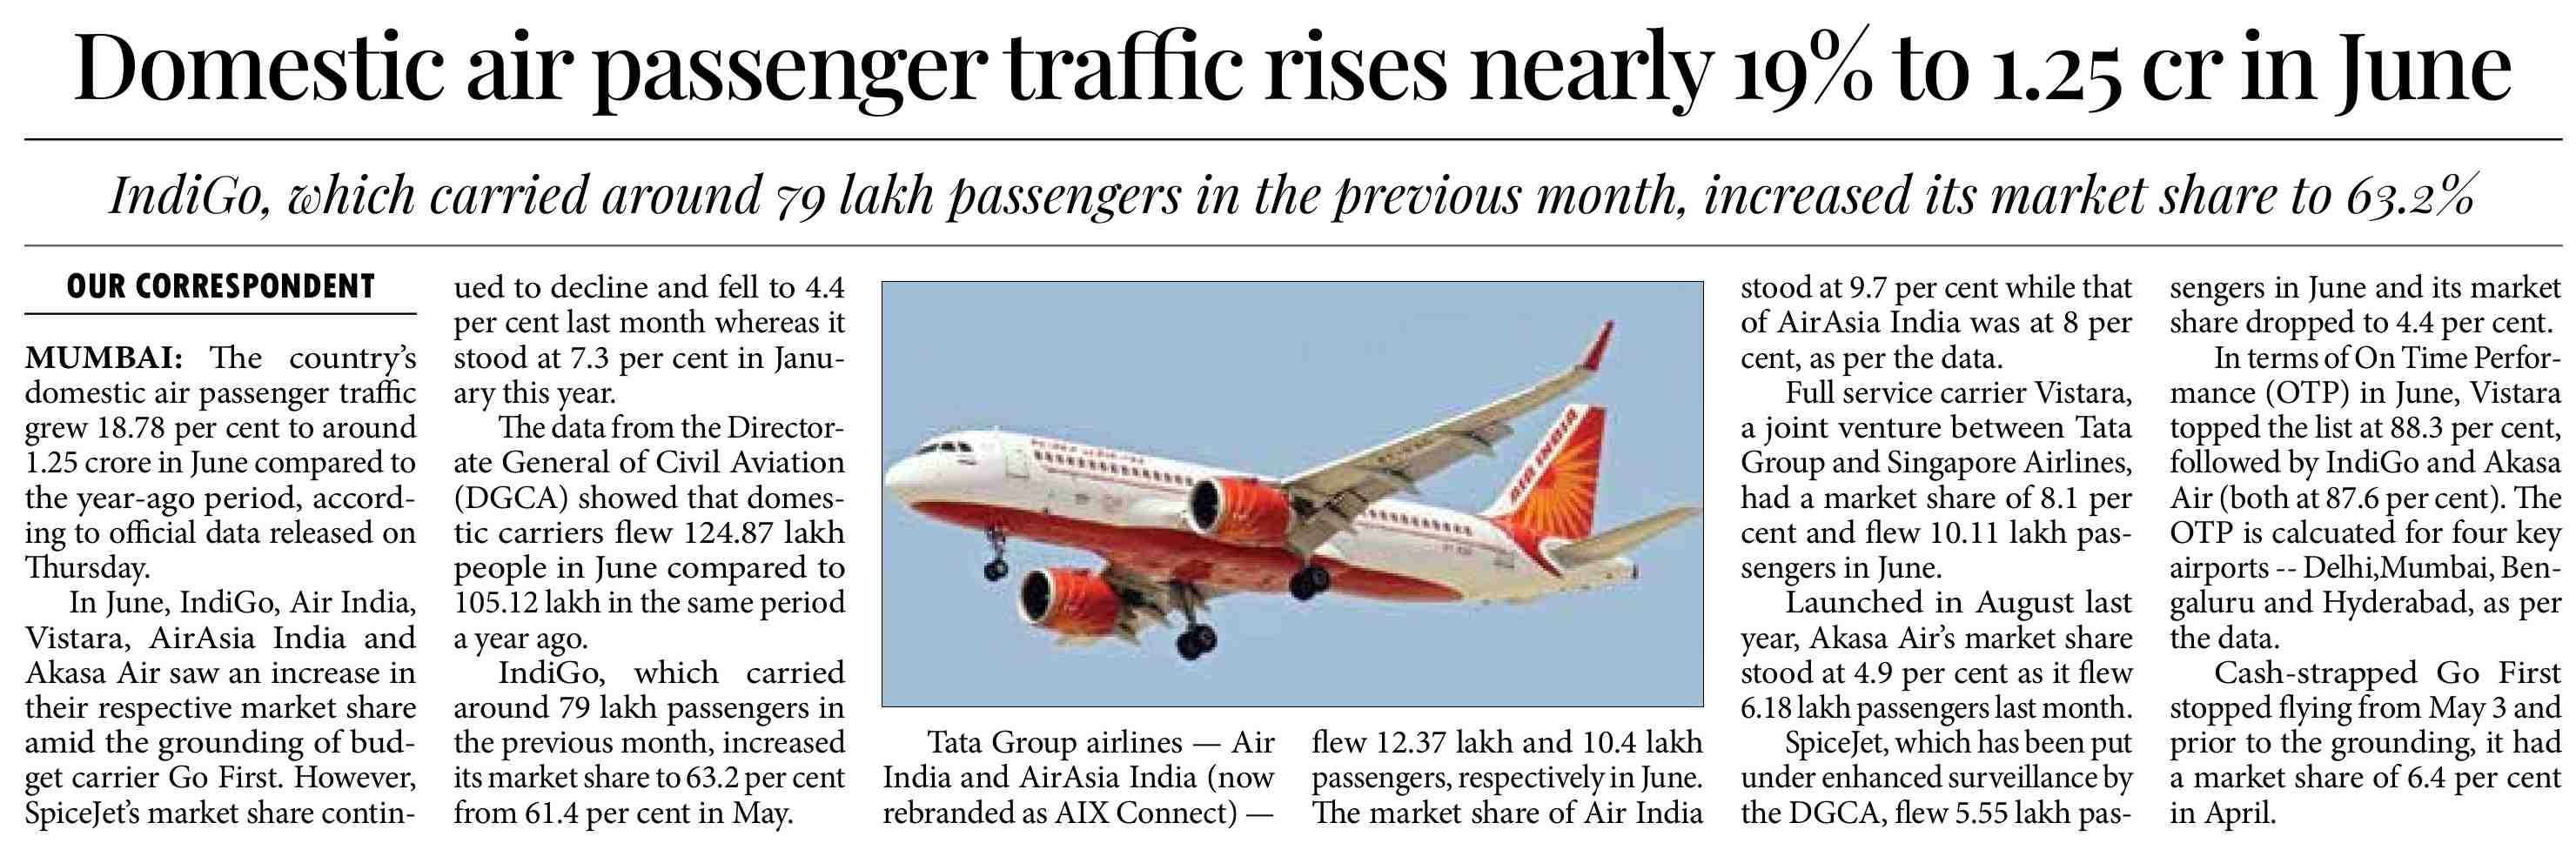 Domestic air passenger traffic nealy 19% to